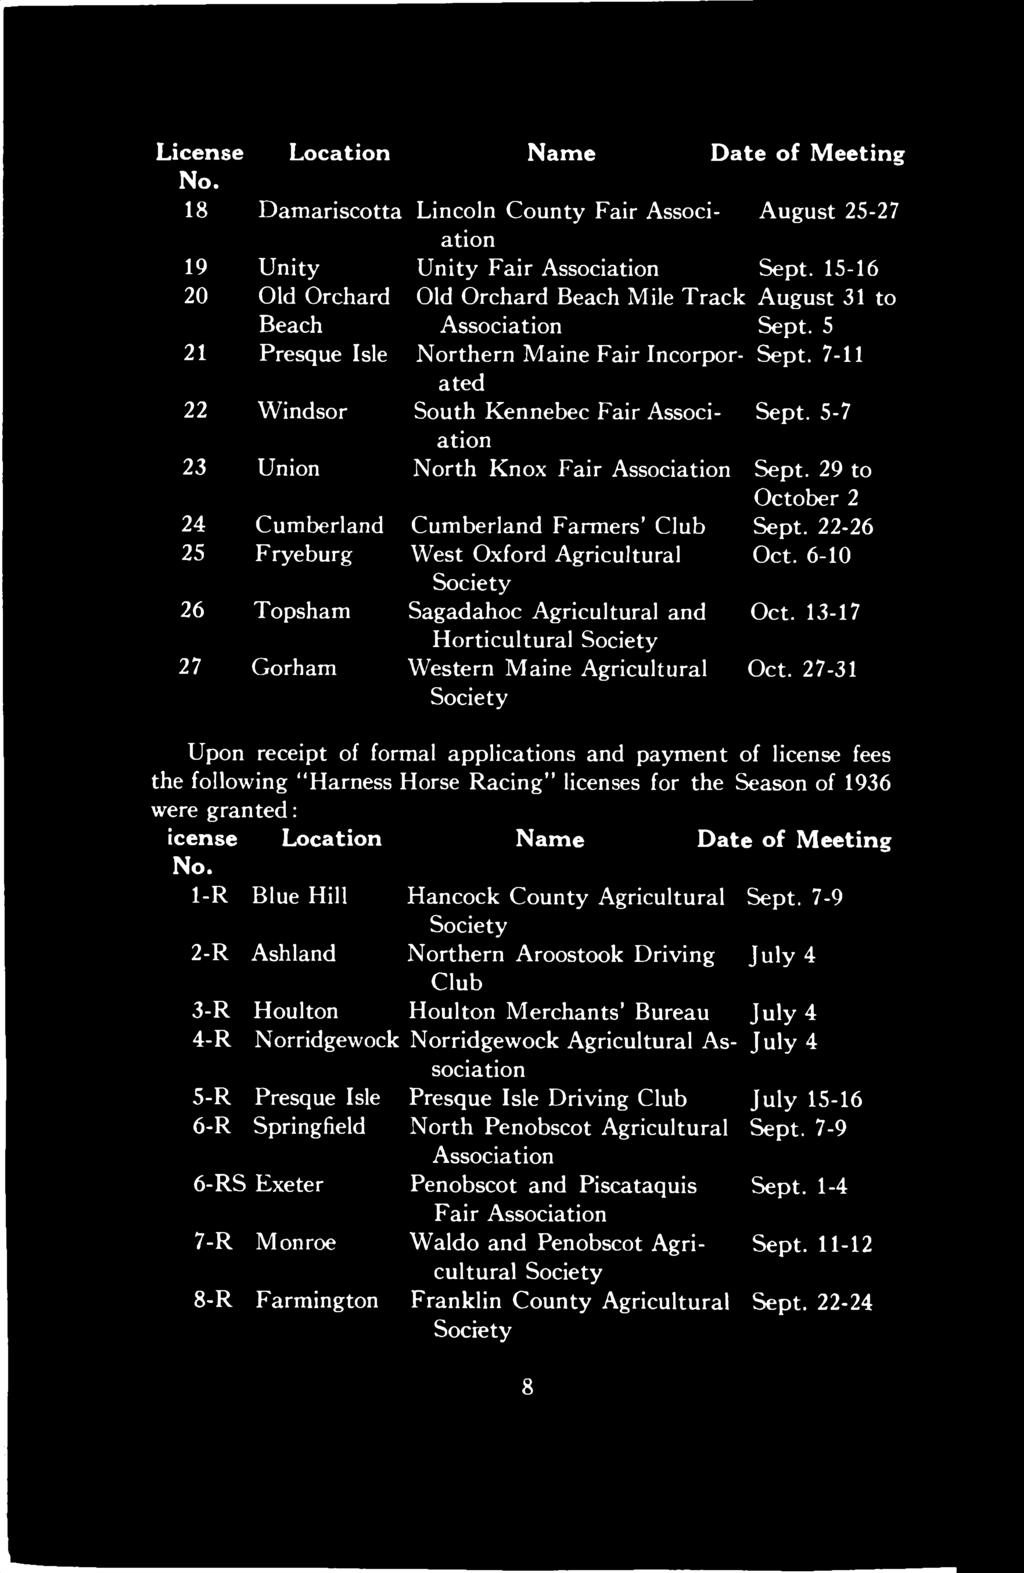 27-31 Upon receipt of formal applications and payment of license fees the following Harness Horse Racing licenses for the Season of 1936 were granted: icense No.